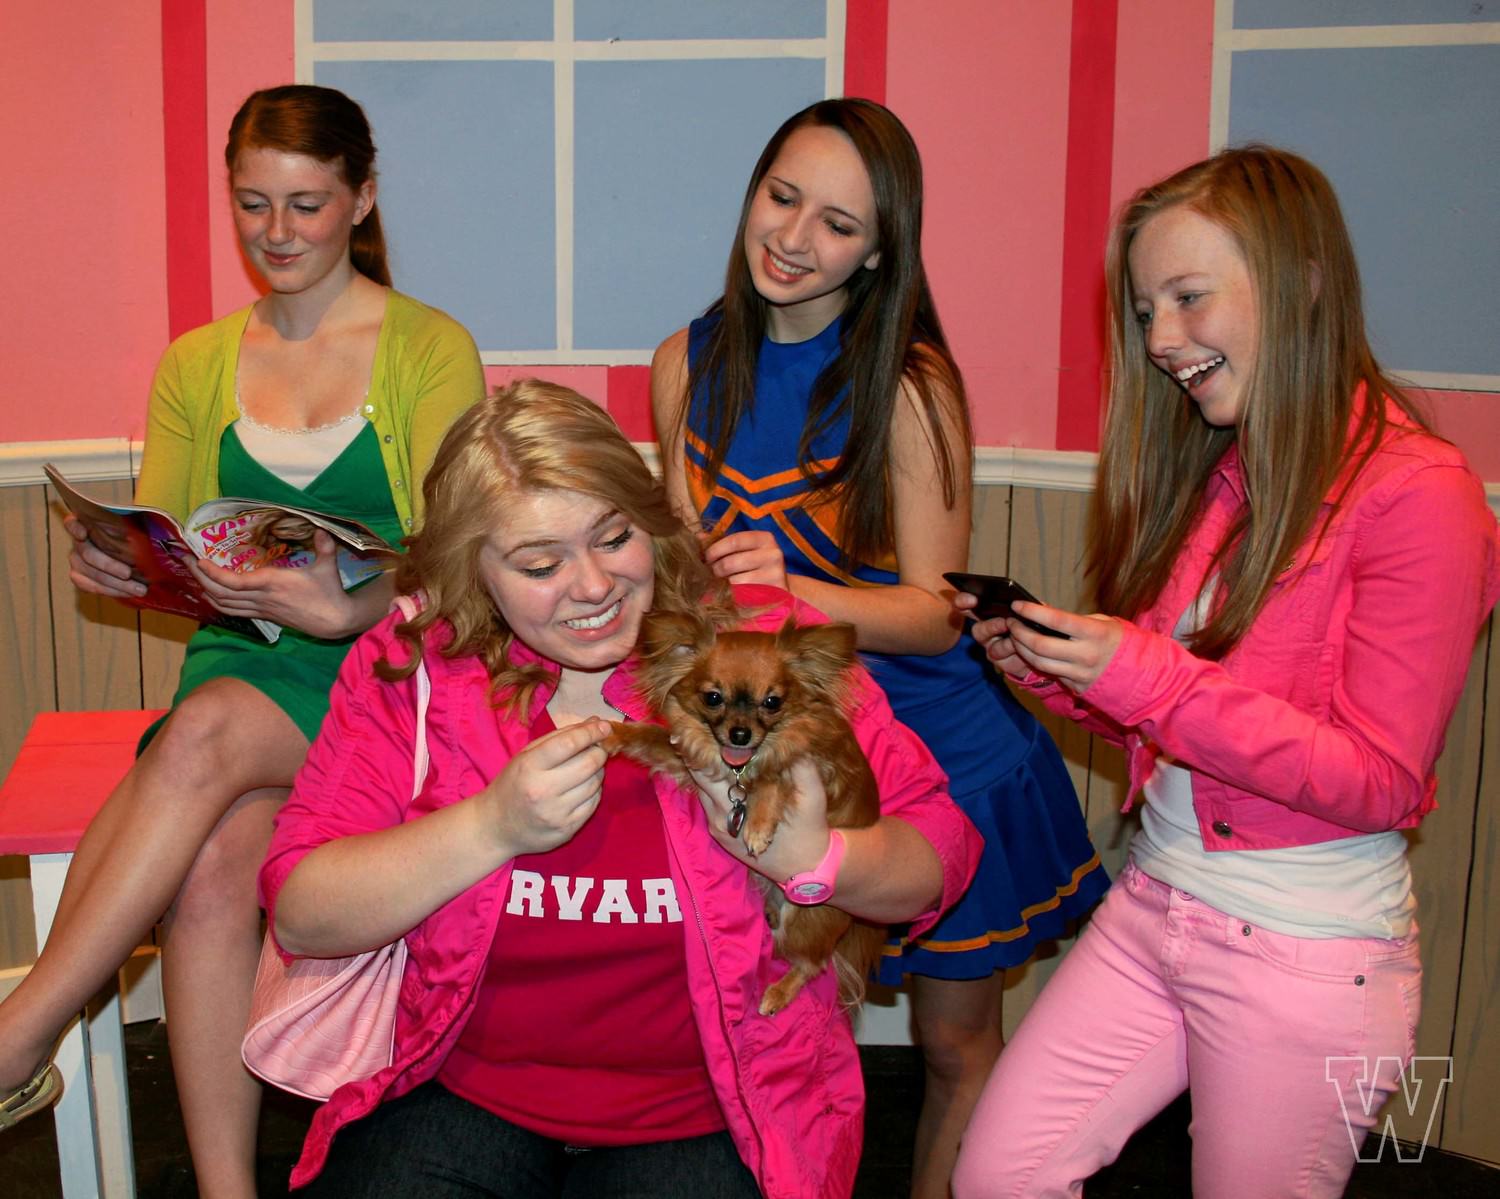 Pink is the new black! West De Pere is set to stage “Legally Blonde: The Musical.” This new contemporary musical comedy follows Elle Woods, a bubbly and blonde sorority president who is dumped by her arrogant Harvard-bound boyfriend, because he’s looking for a “Jackie,” not a “Marilyn.” Determined to win him back and follow him to Harvard, Elle applies to the prestigious law school. To the surprise of her peers, Elle is accepted into the program and ventures out into the cutthroat world that is Harvard Law, but to her own surprise, she discovers that she can accomplish more on her own than with a man by her side.
“Legally Blonde: The Musical” adds a modern twist on the classic lesson, “never judge a book by its cover,” and demonstrates one girl’s perseverance in the face of adversity. This show features upbeat, exciting musical numbers such as, “So Much Better,” “What You Want,” “Chip on My Shoulder,” and “Positive.” Nominated for seven Tony awards and ten Drama desk awards, “Legally Blonde: The Musical” is a must-see!
West De Pere High School
665 Grant St., De Pere
February 21, 22, 23
7:30 (doors open at 7:00)
Tickets are available in the High School office (7:30am - 3:30pm) or at the door
$7 regular admission, $5 Facebook fans and Twitter followers of “WDPHS Theatre